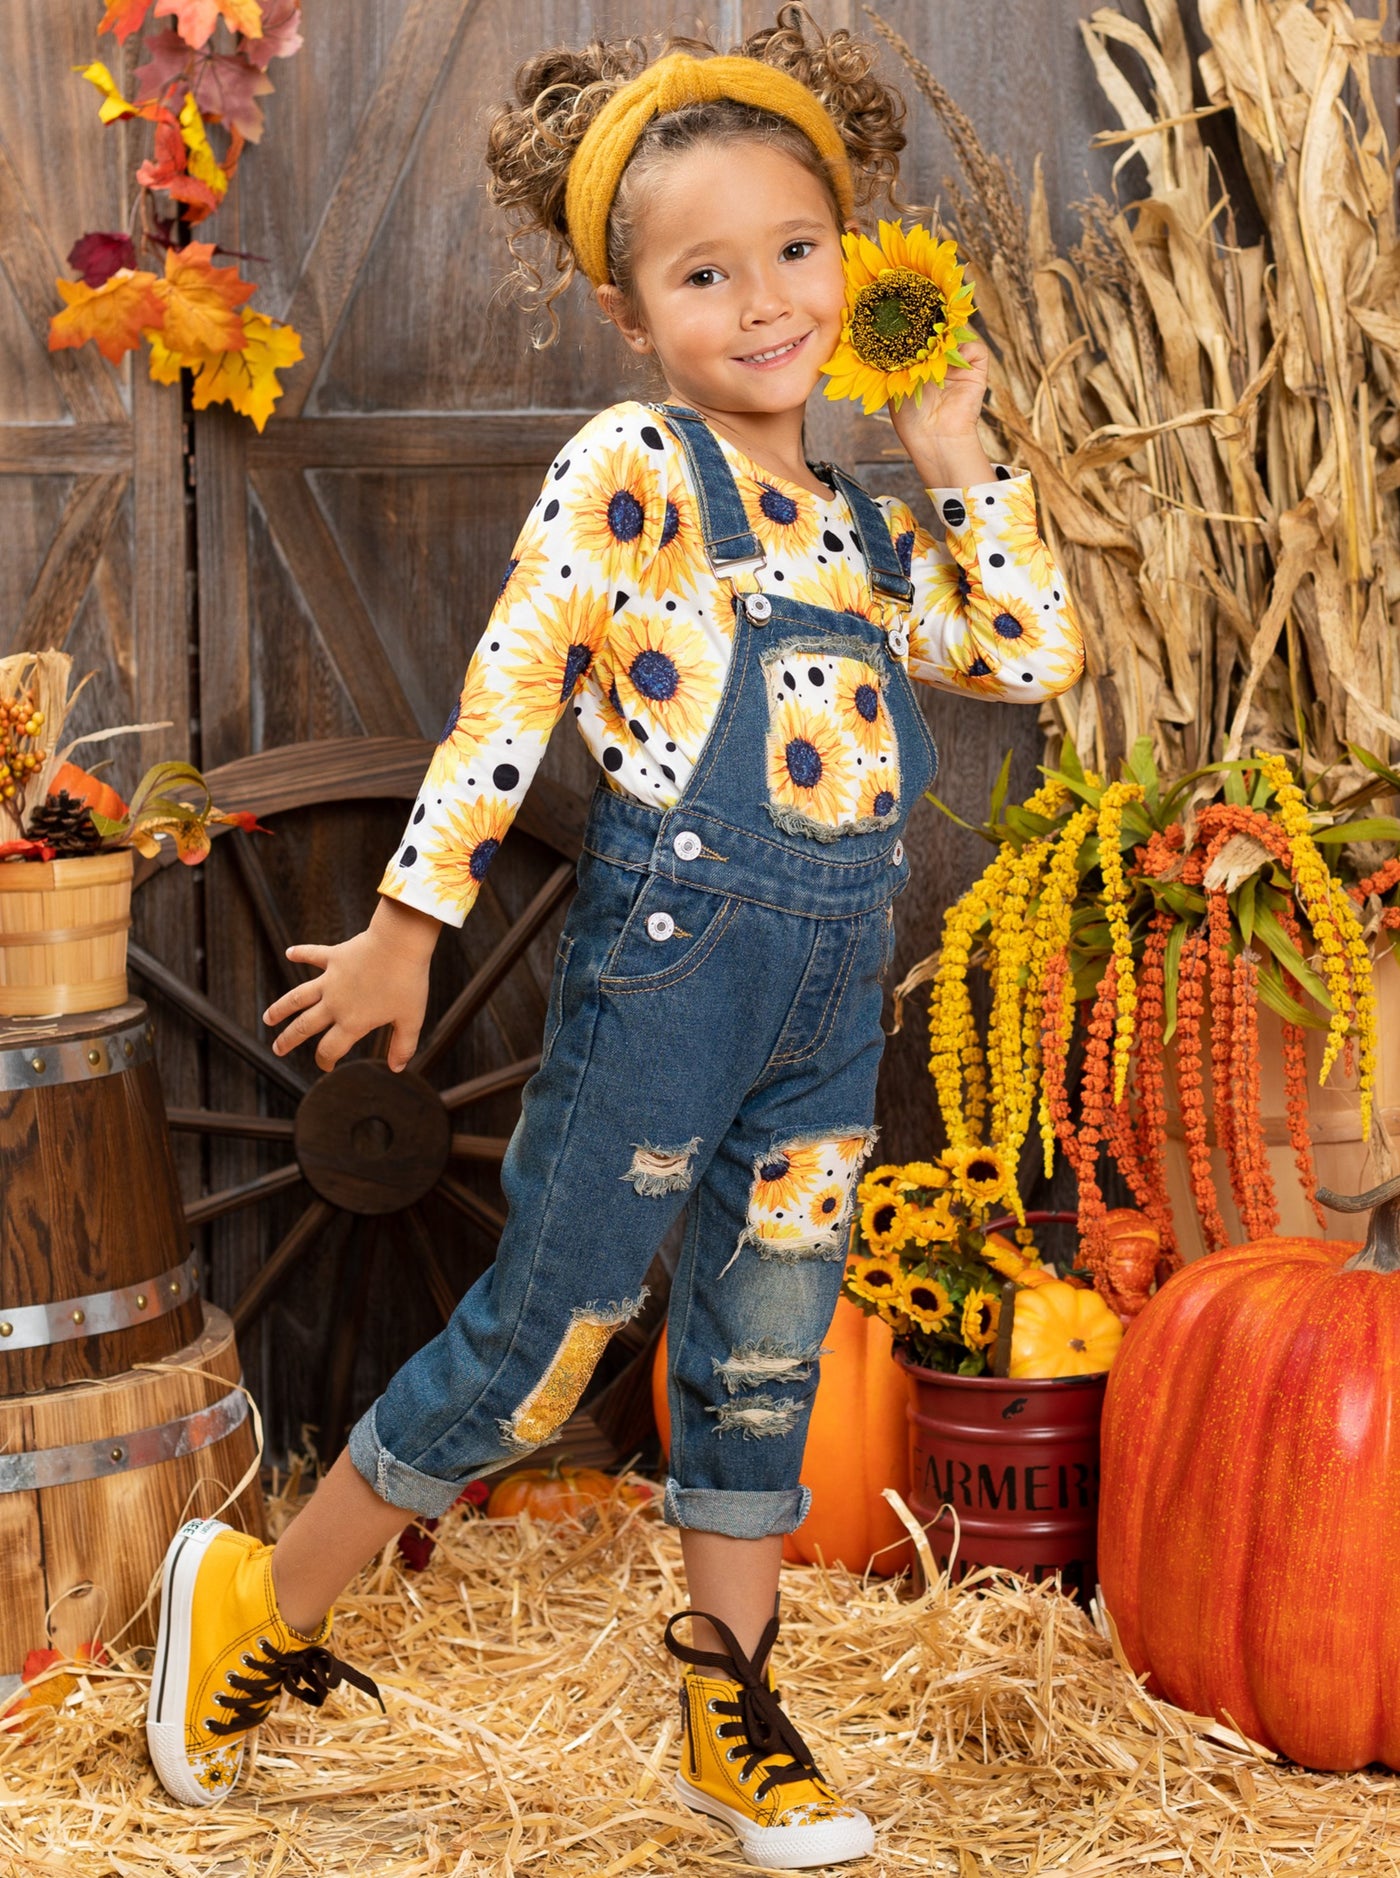 Girls fall long-sleeved sunflower print top and sequin patched denim overalls with adjustable shoulder straps and cuffed hems - Mia Belle Girls